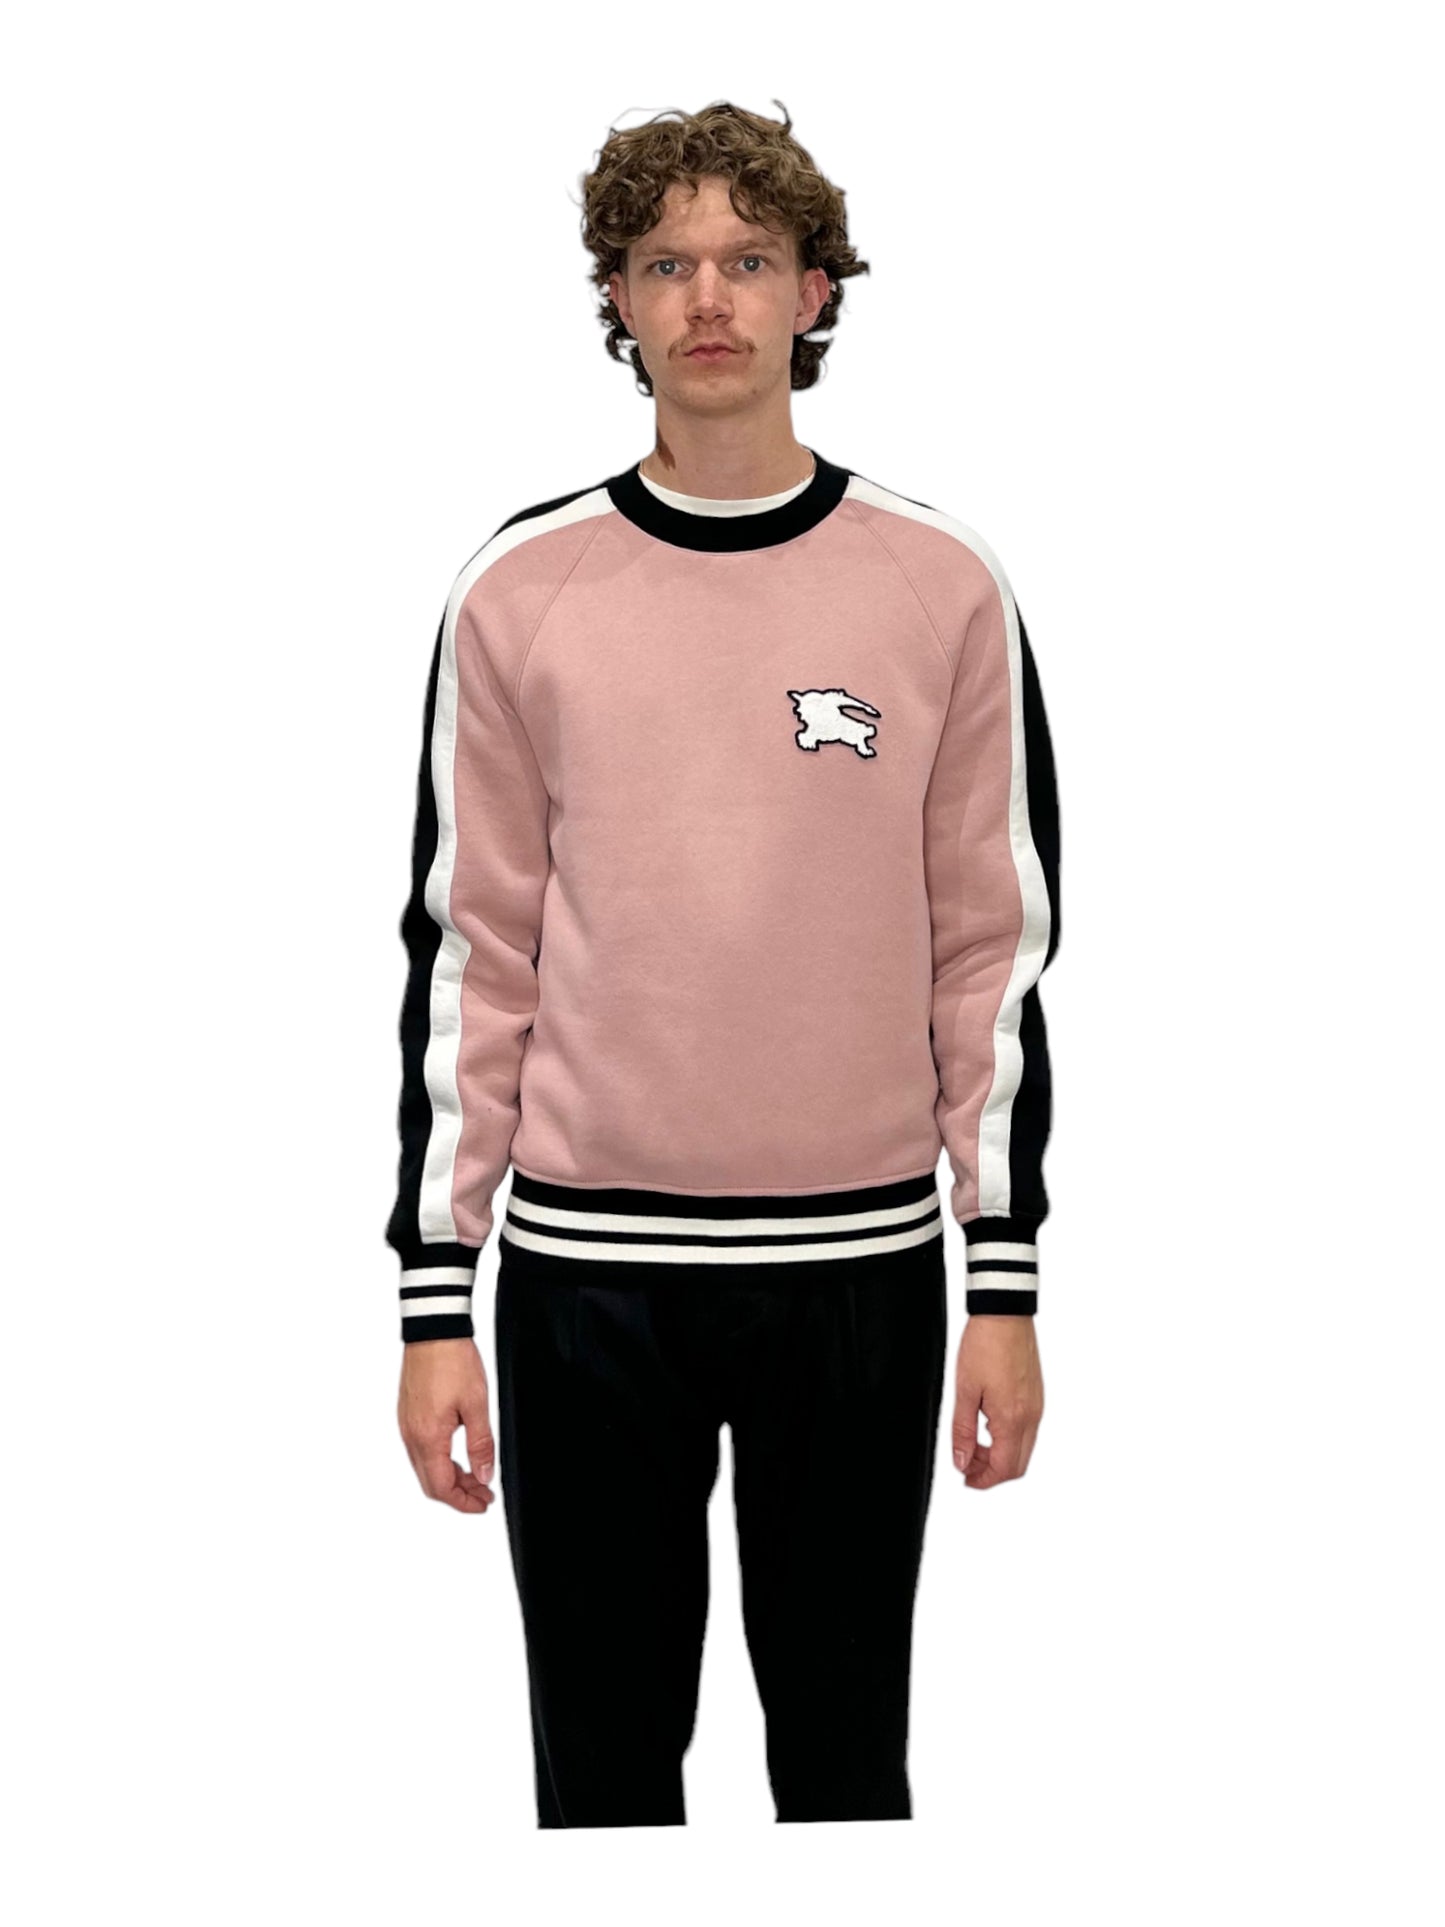 Burberry Pink Embroidered Equestrian Logo Jumper - Genuine Design Luxury Consignment for Men. New & Pre-Owned Clothing, Shoes, & Accessories. Calgary, Canada